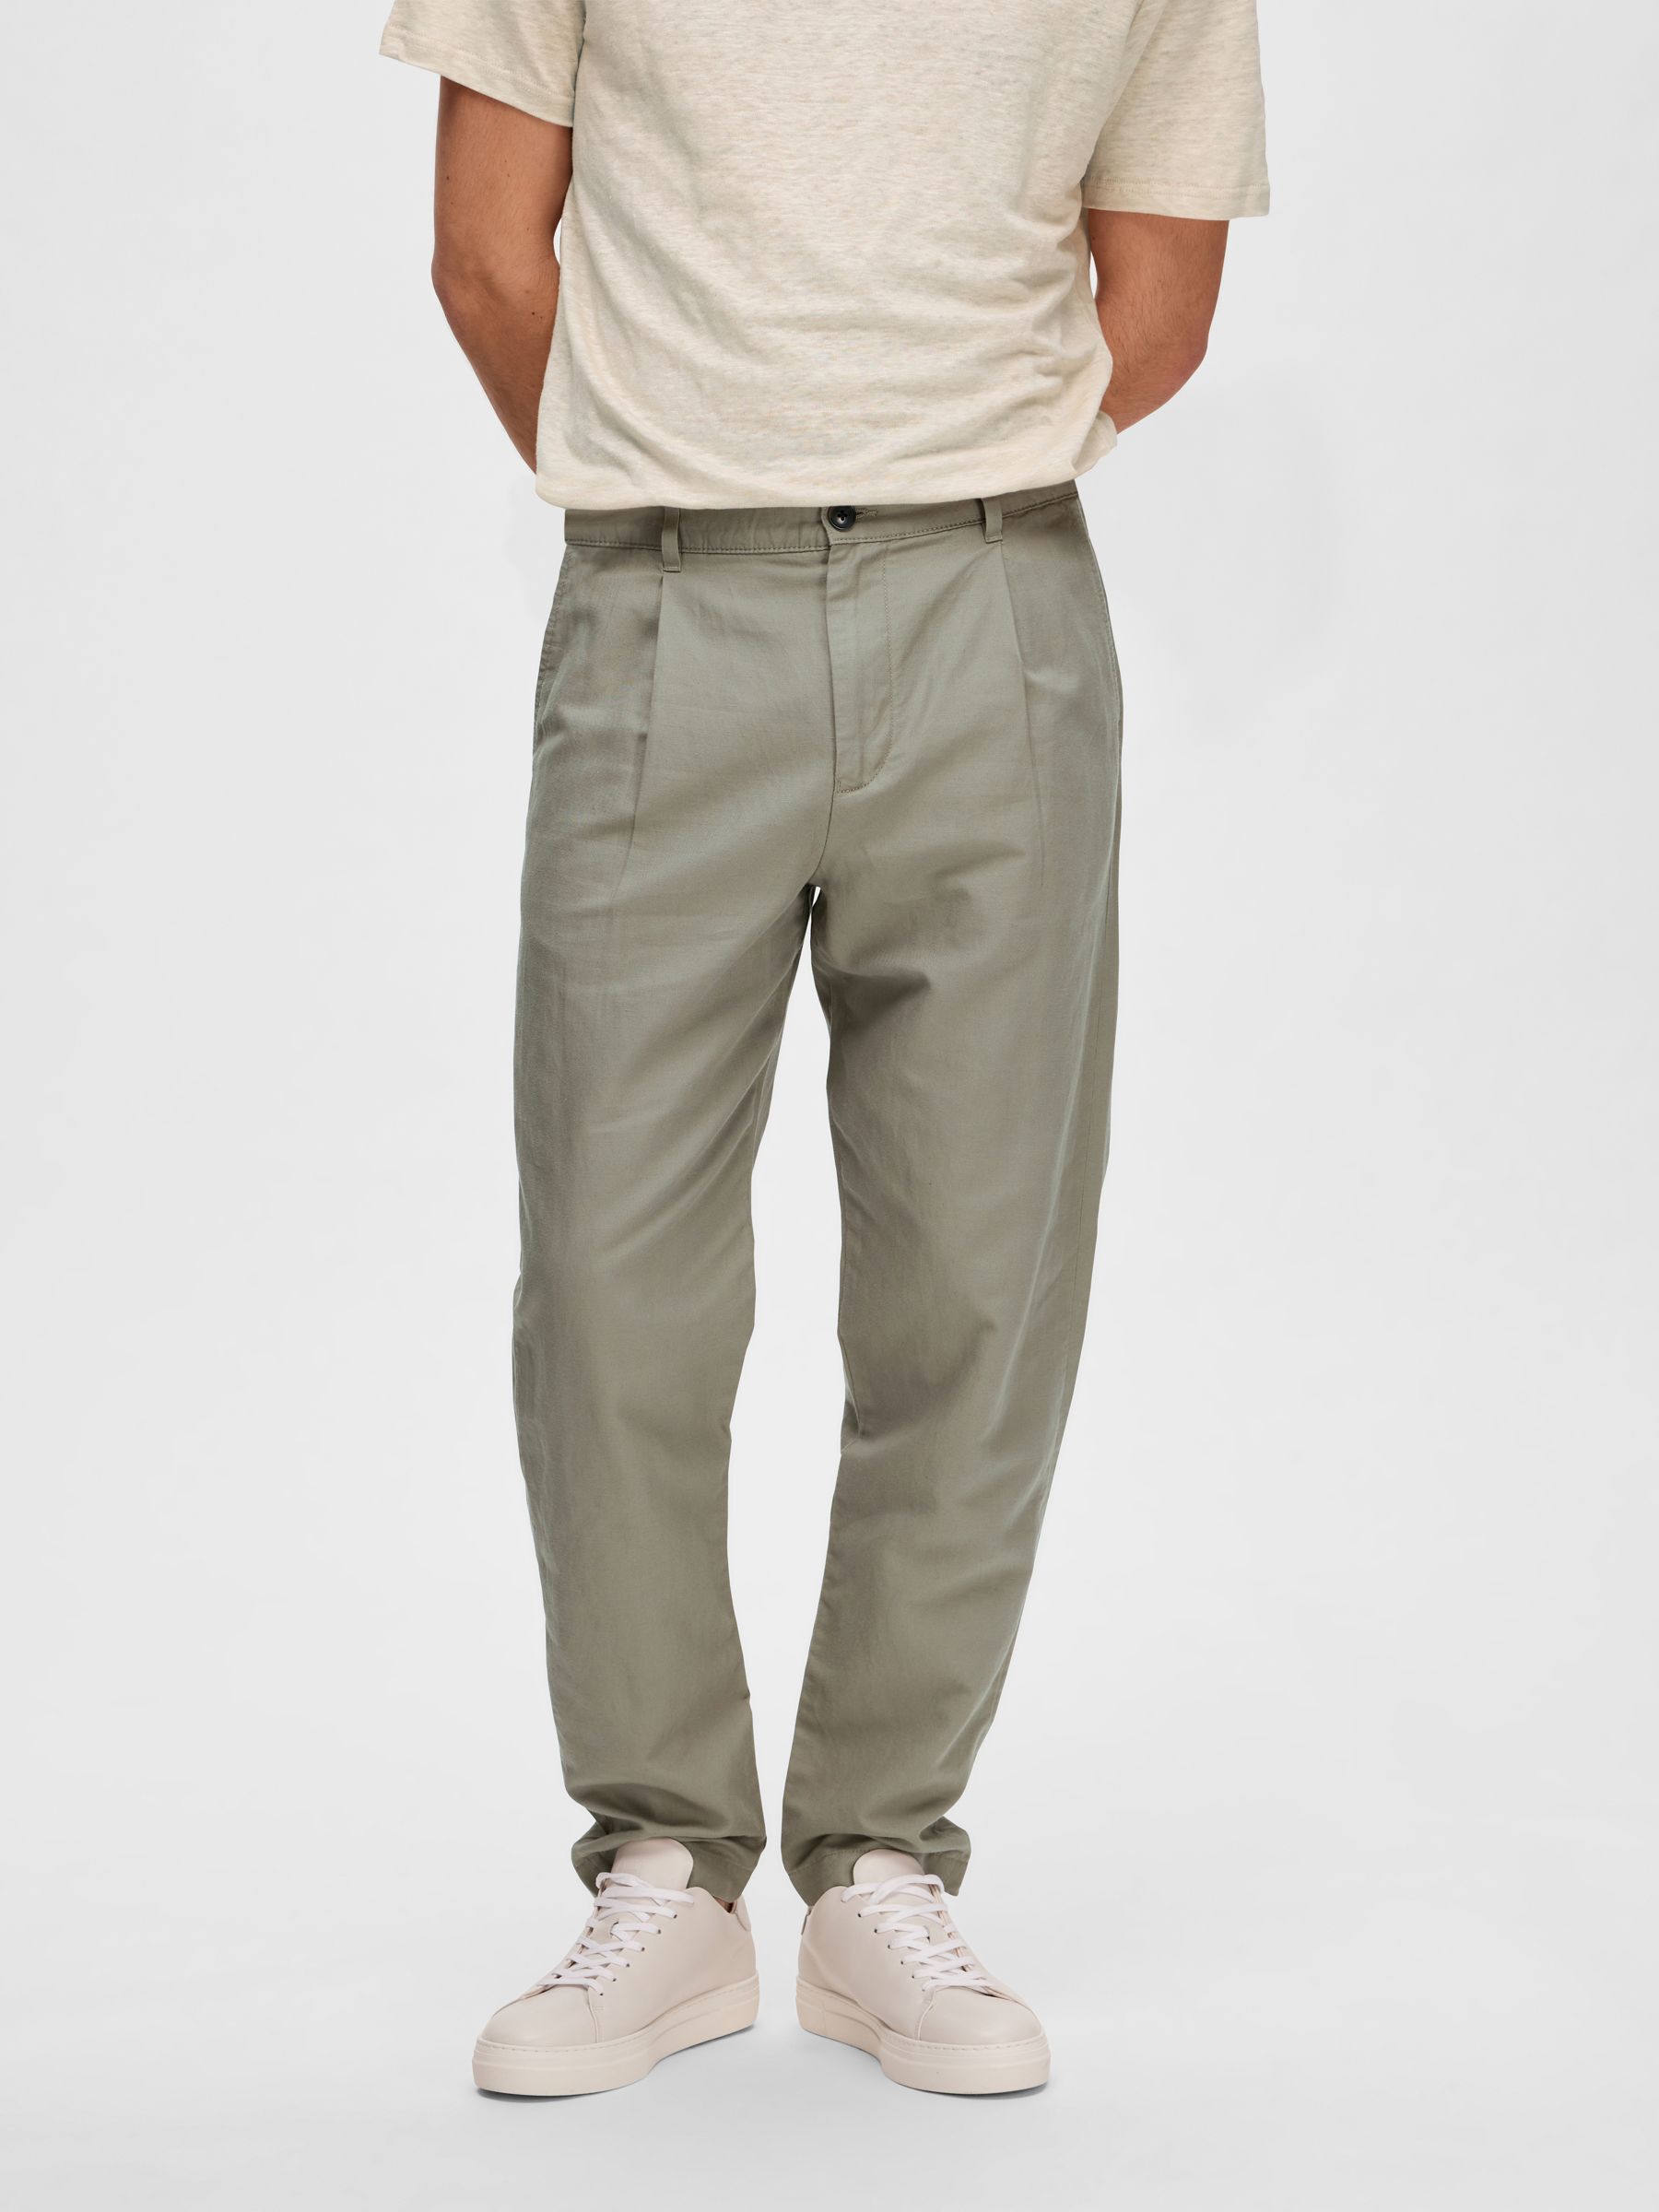 2-pack Slim Fit Chino pants with 20% discount! | Jack & Jones®